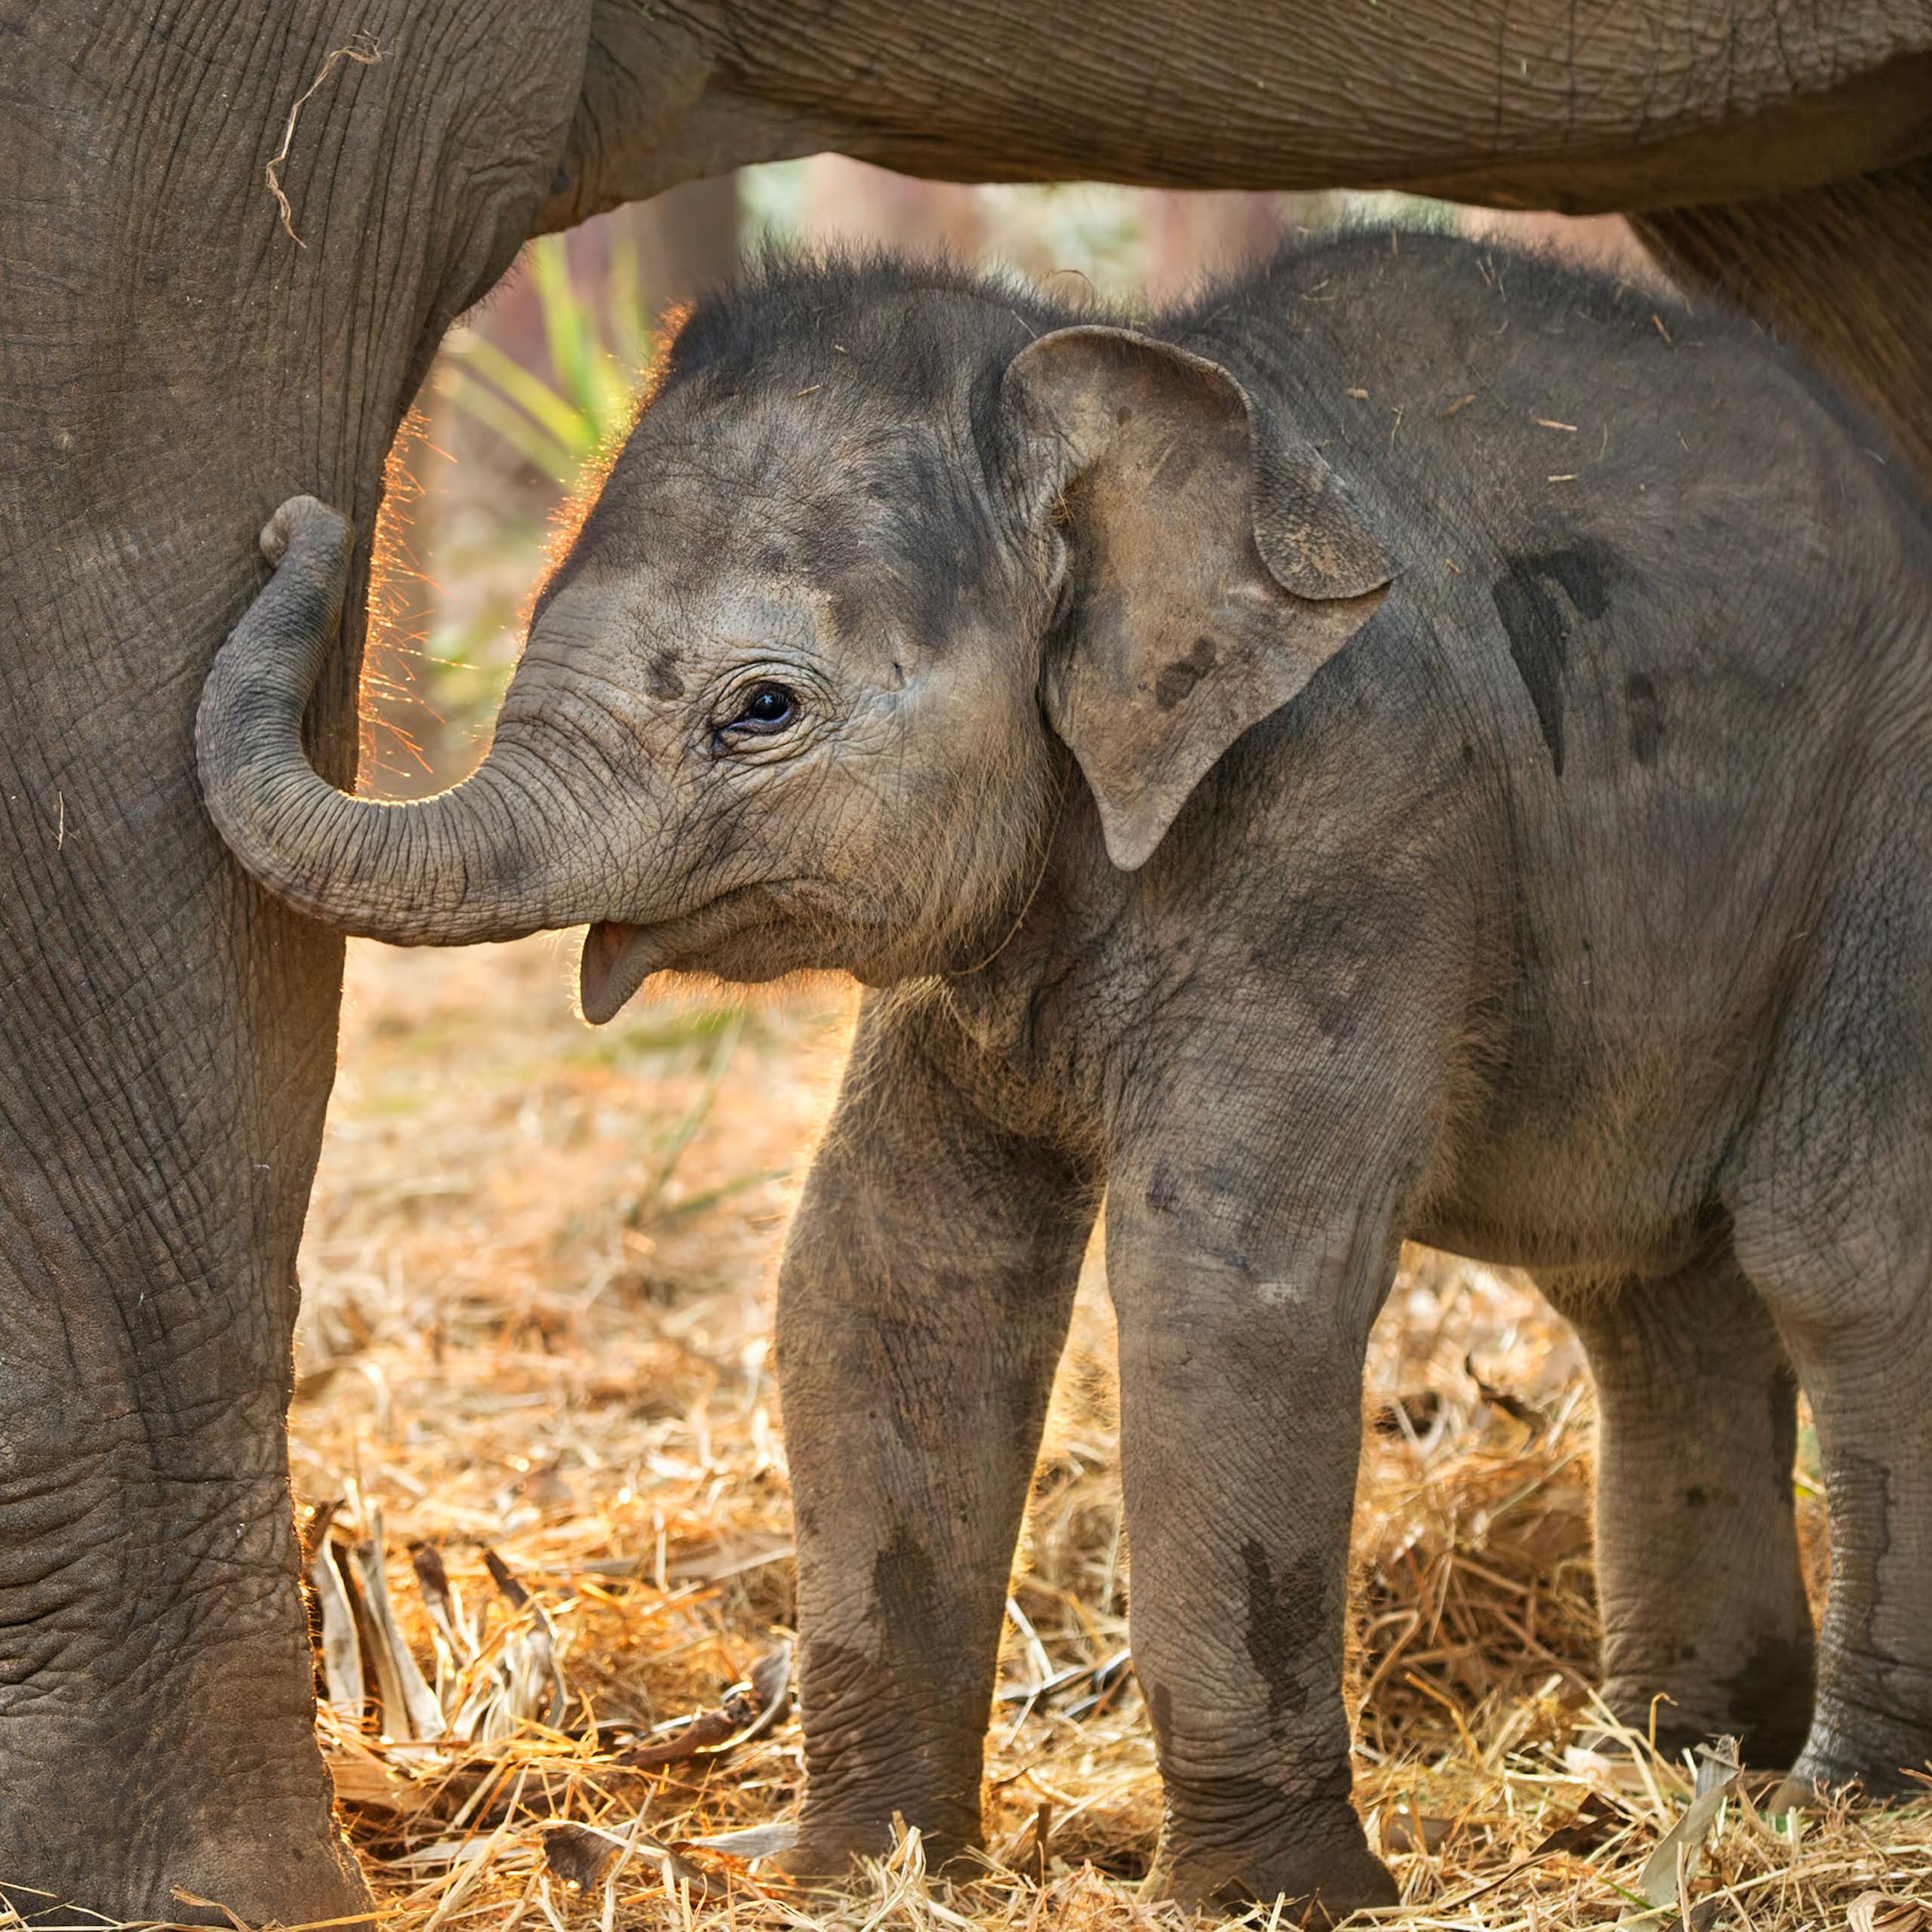 Baby elephant calf stands under legs of adult elephant, yellow grassy ground, blurred elephants in background